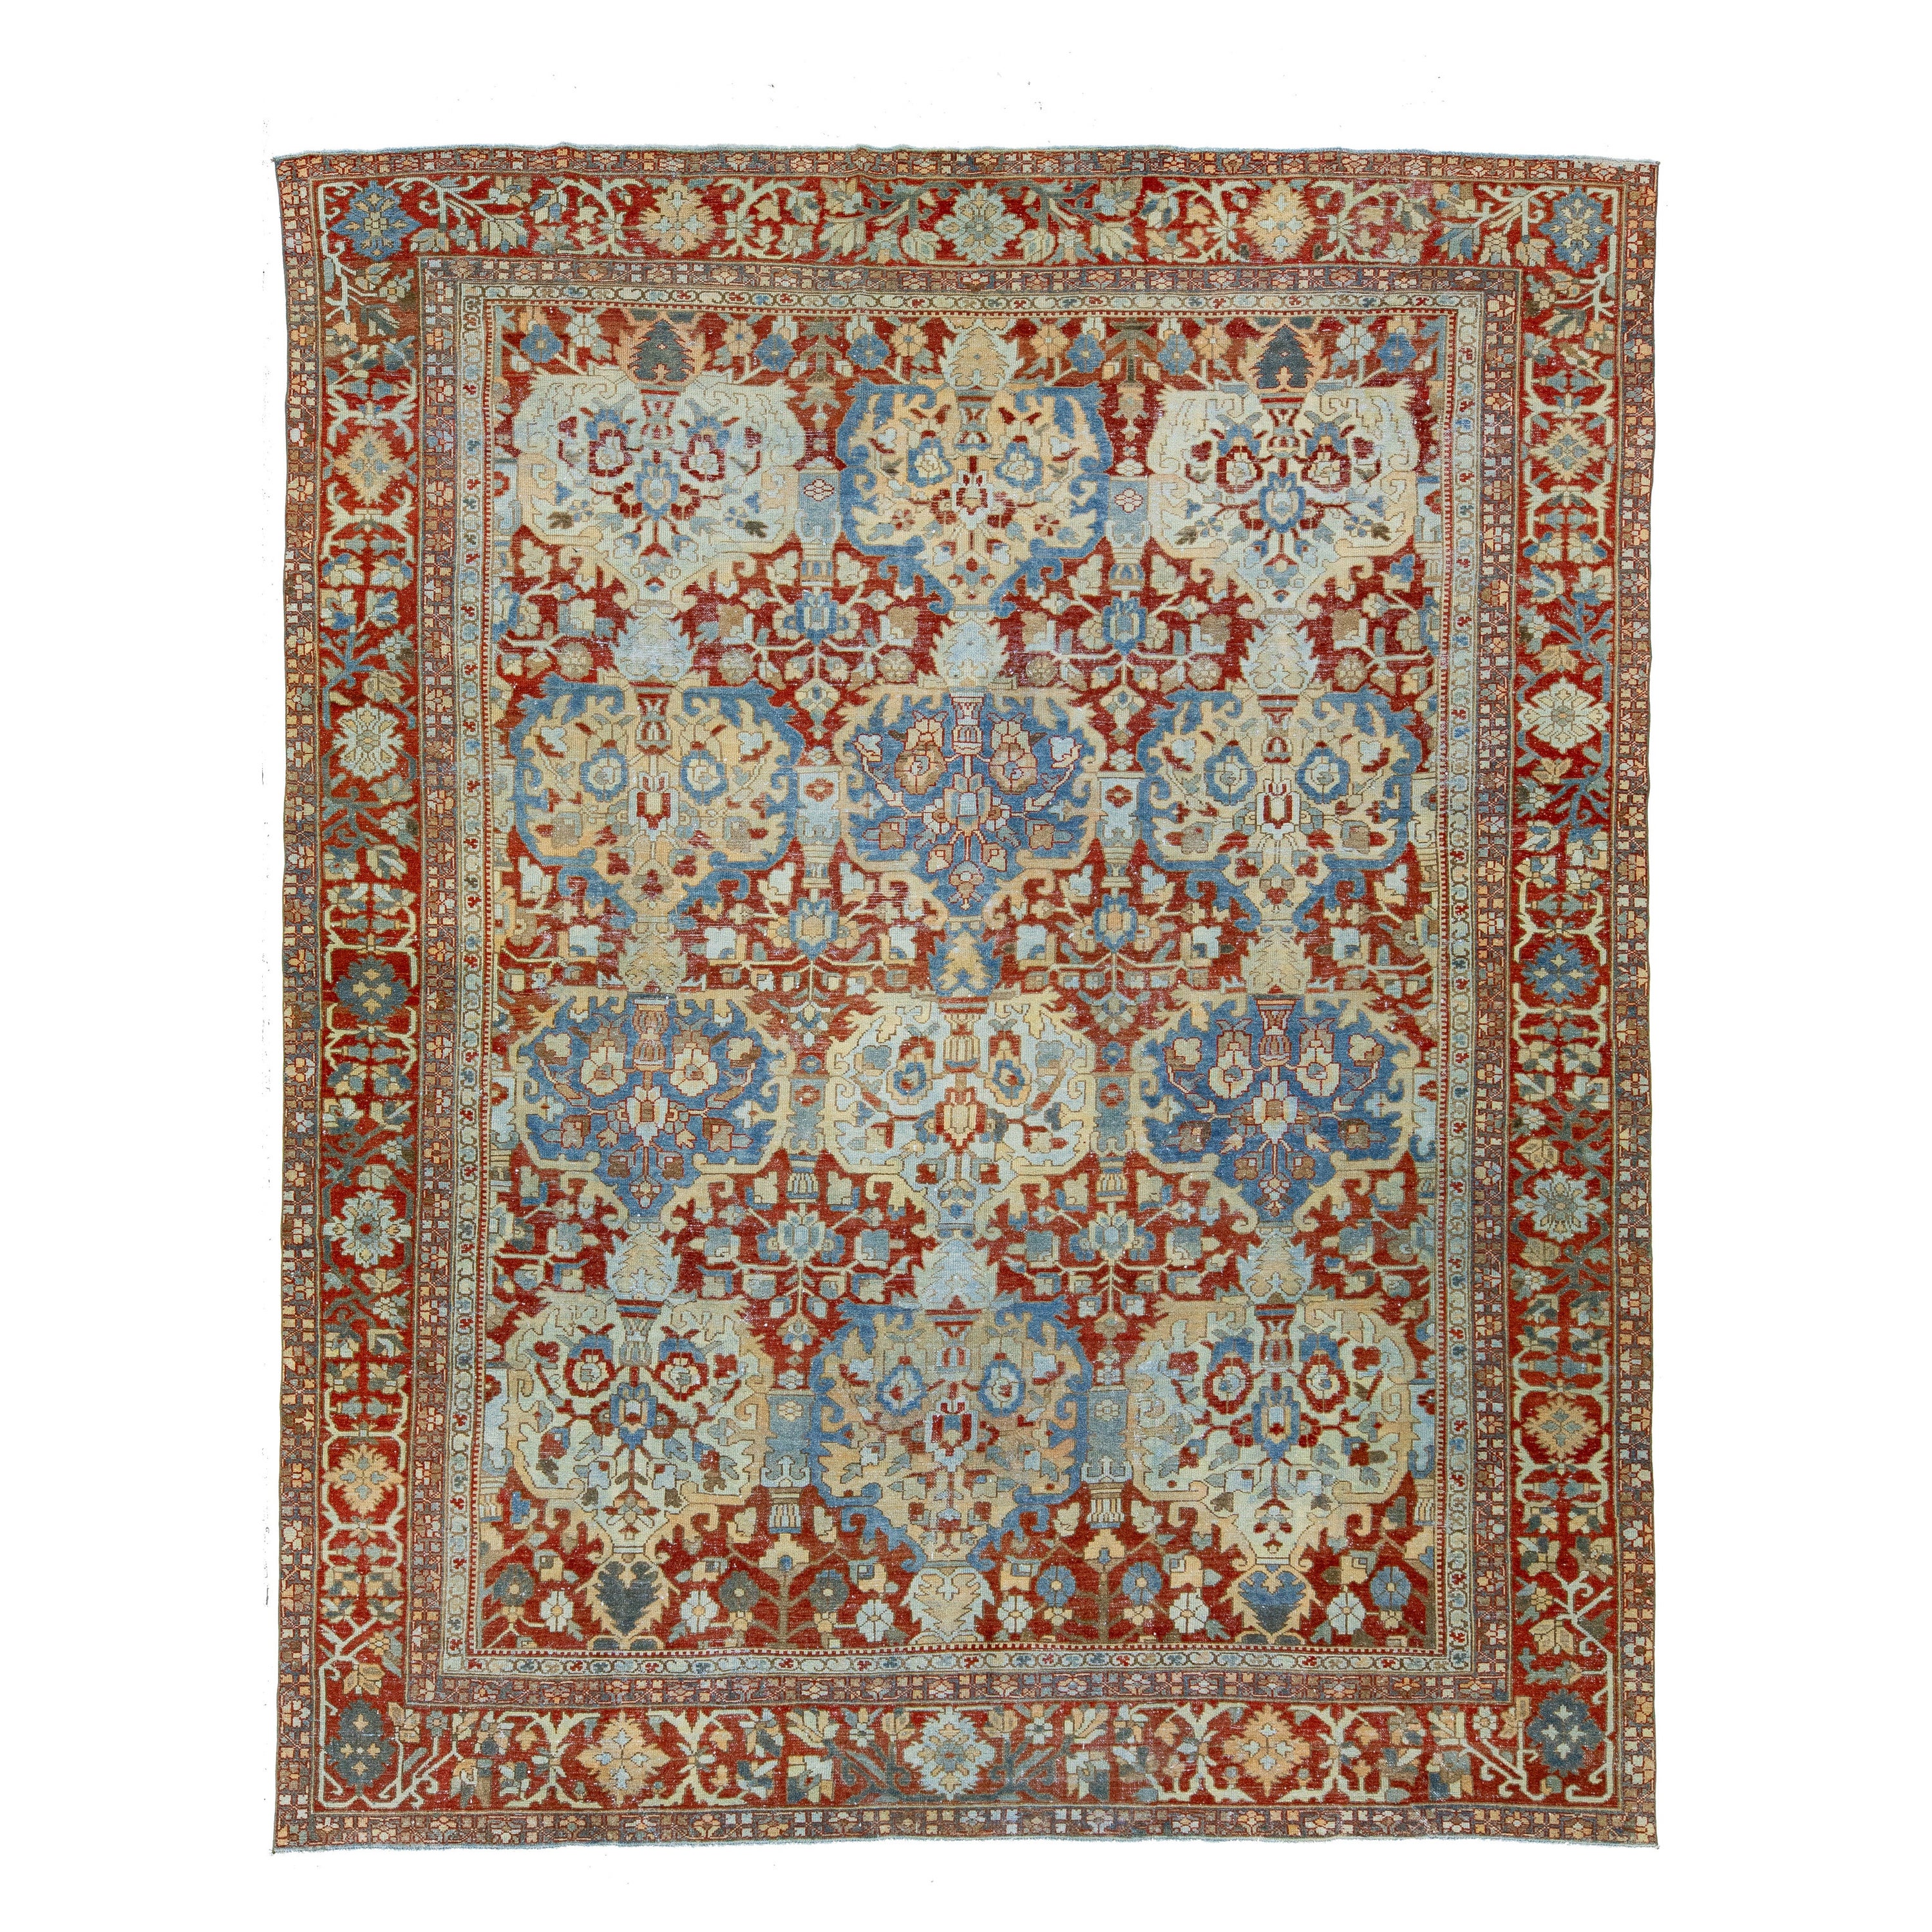 Handmade Persian Bakhtiari Red Wool Rug featuring an Allover Floral Pattern